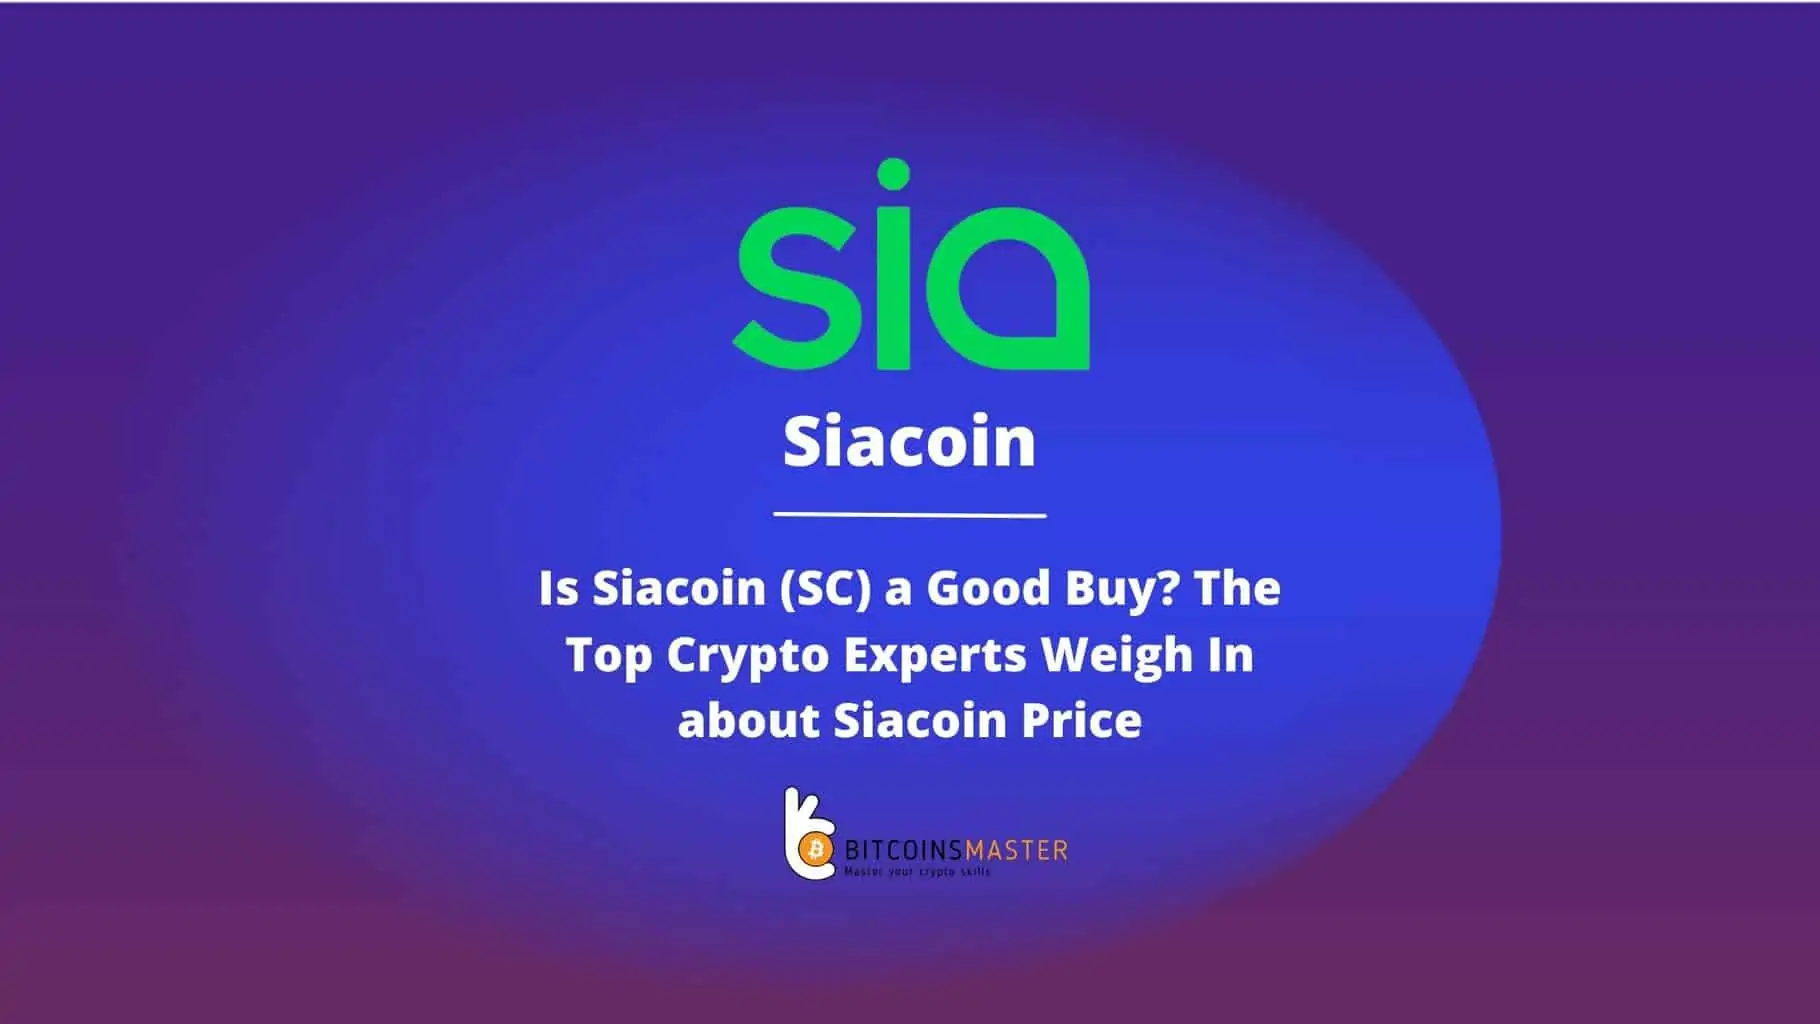 Is Siacoin (Sc) A Good Buy? The Top Crypto Experts Weigh In About Siacoin Price